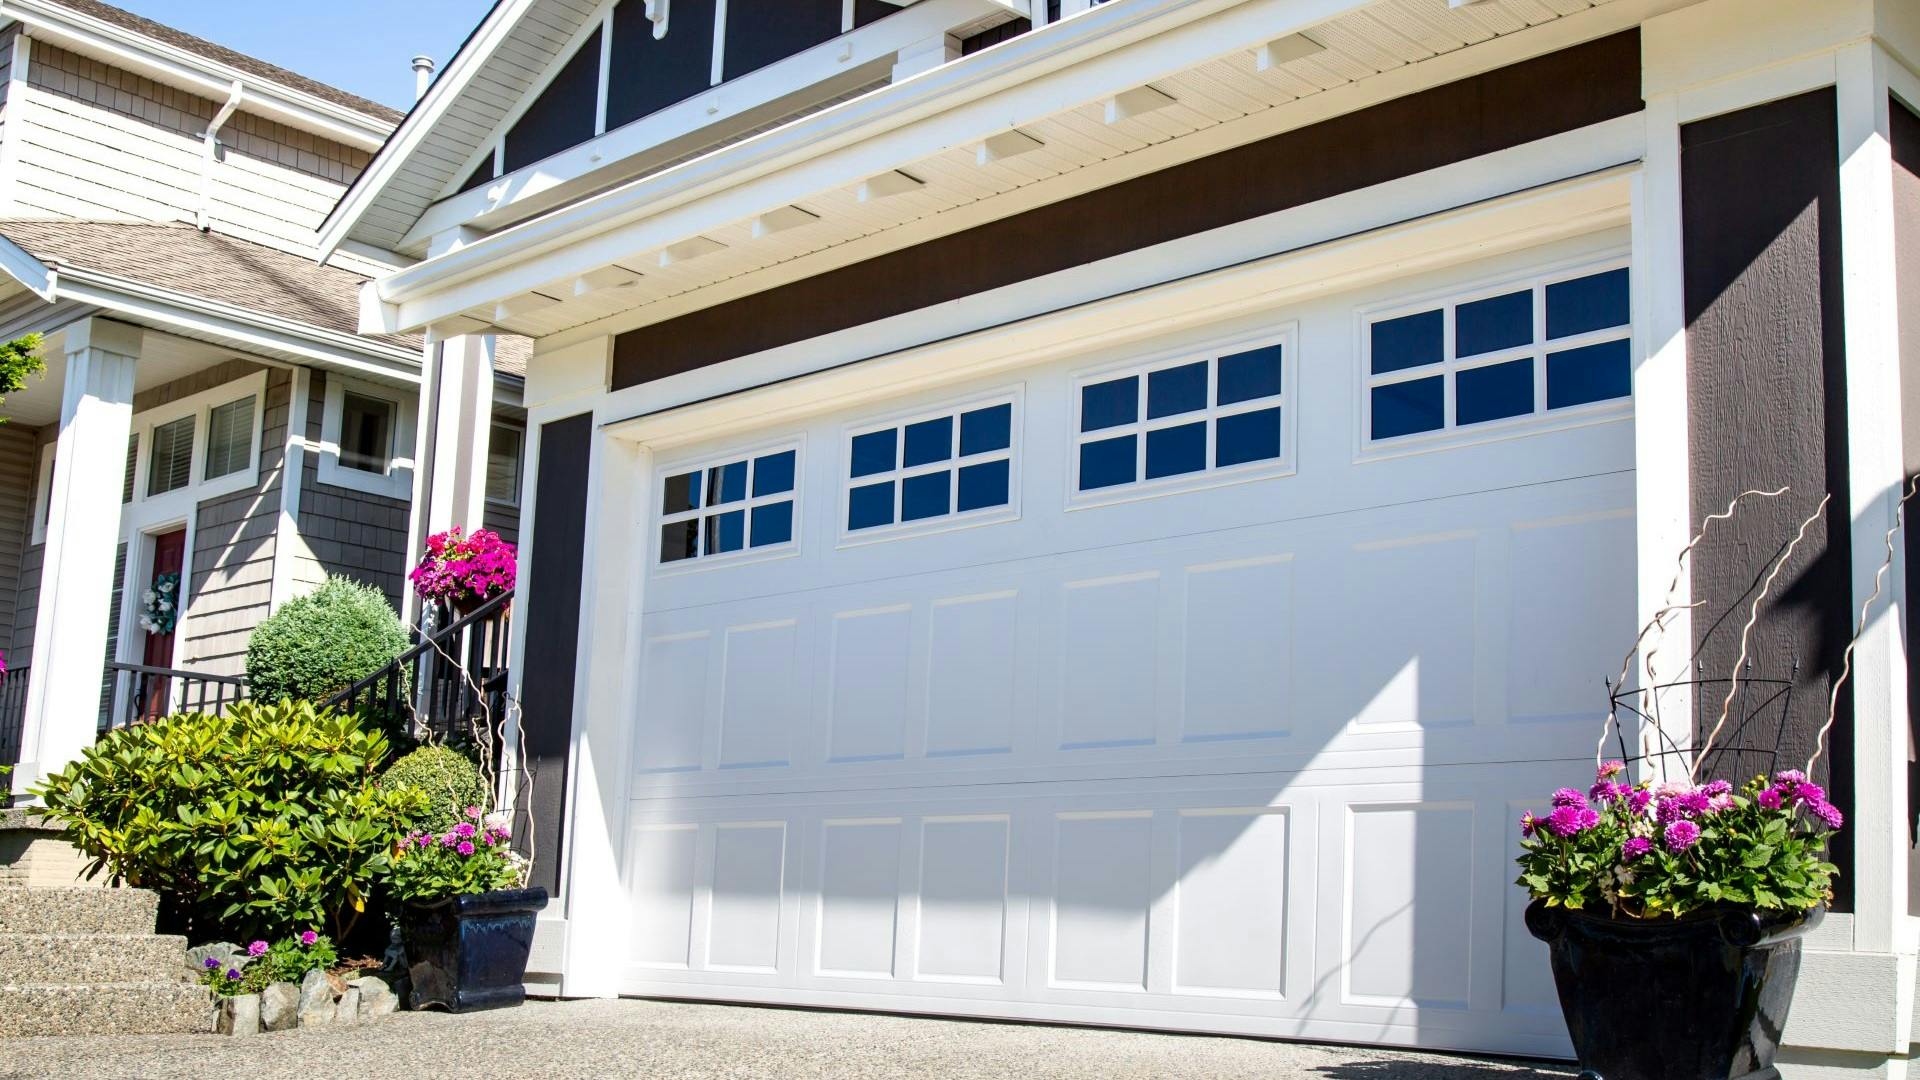 White garage door with glass pannels at the top